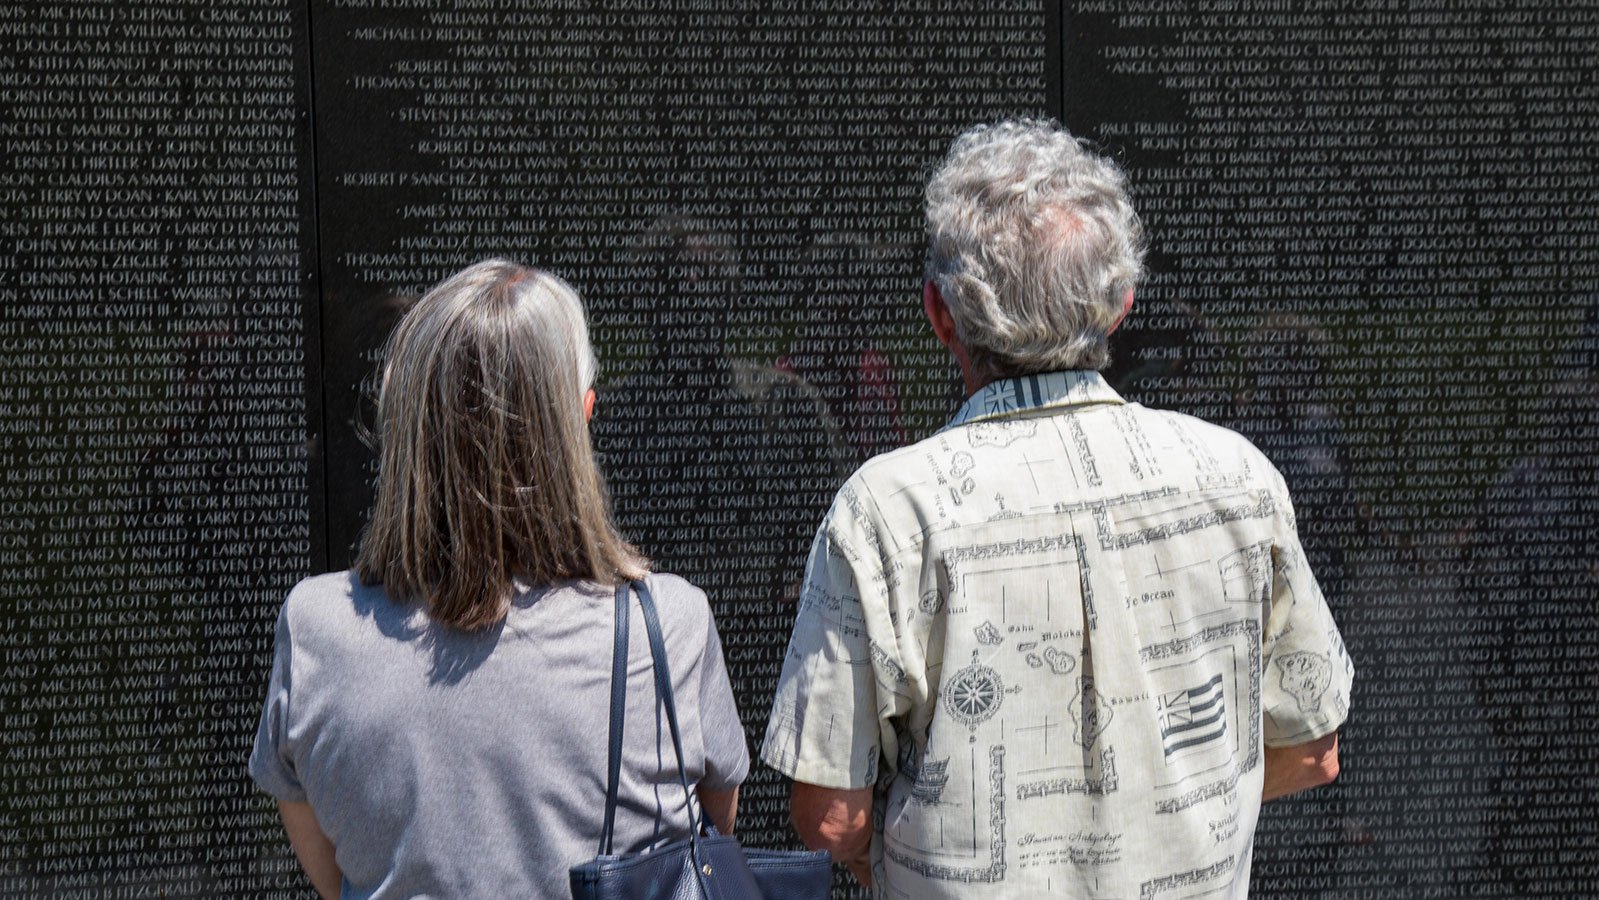 Visitors read the names of the dead or missing at the Vietnam Veterans Memorial in Washington, D.C.